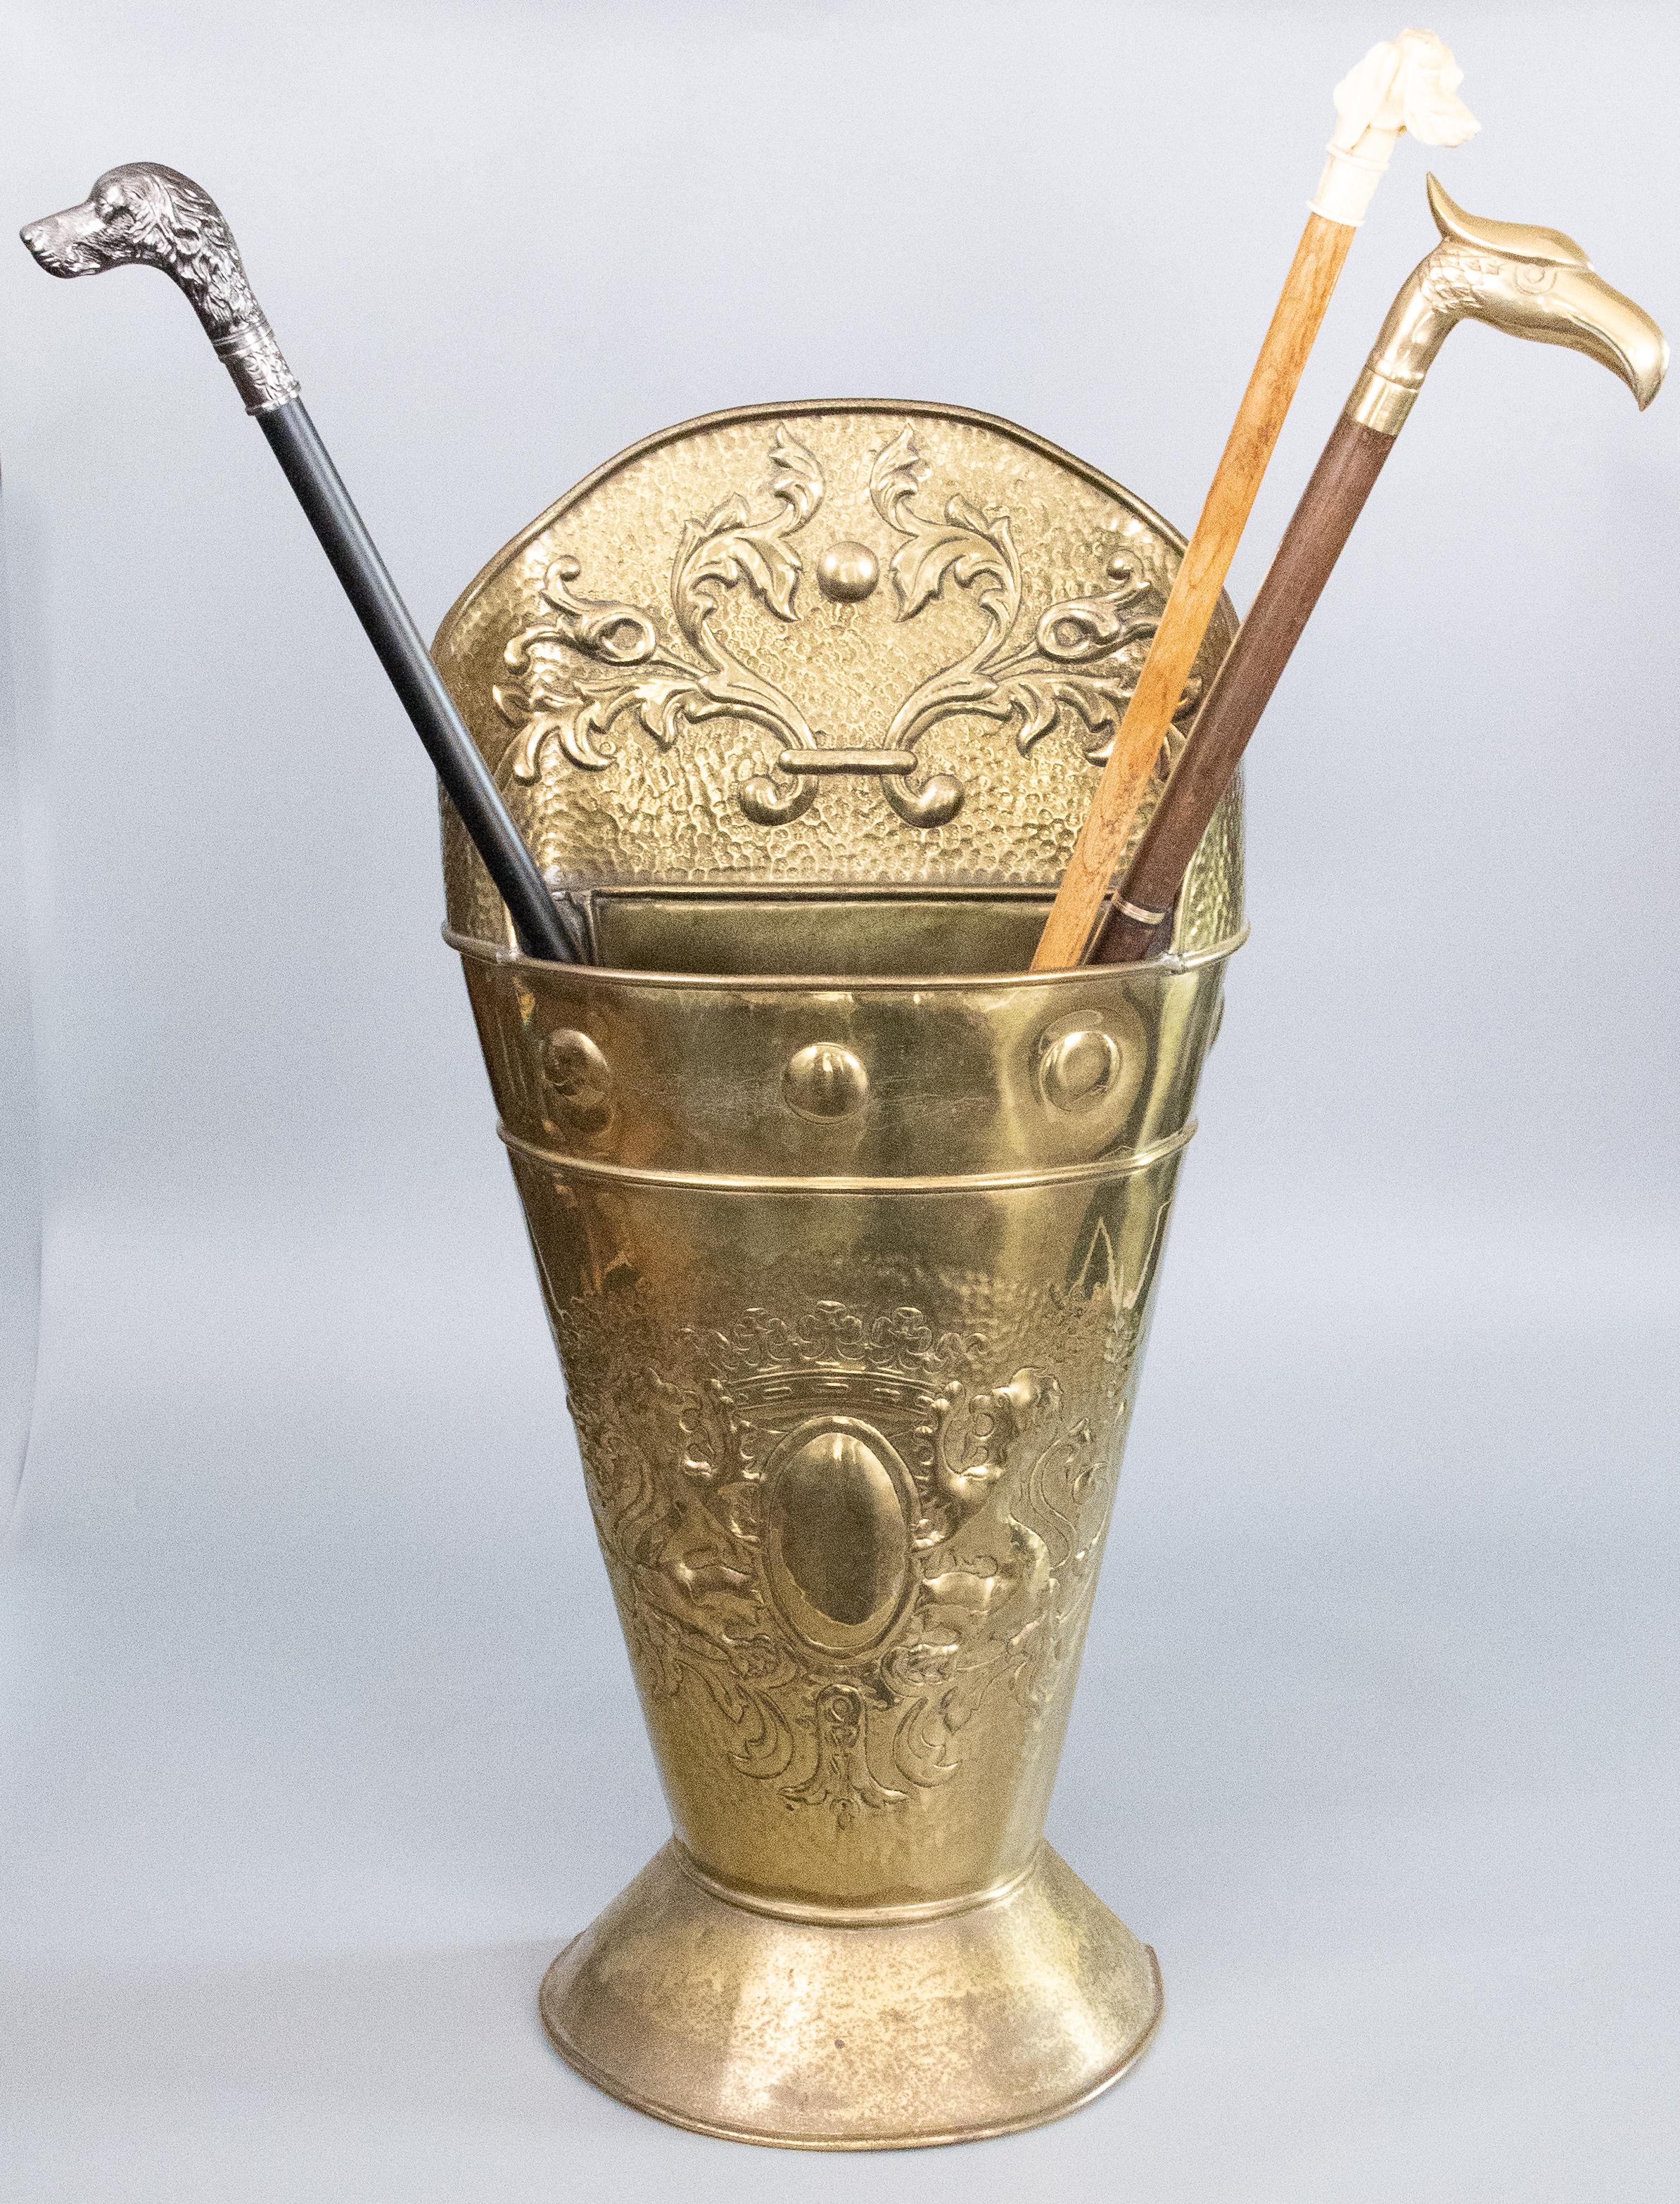 A superb large antique French hammered brass repoussé walking stick and umbrella stand, circa 1880. This was originally a grape hod or wine harvest basket but is ideal as an umbrella stand or for kindling by a fireplace. It's a fine quality hand